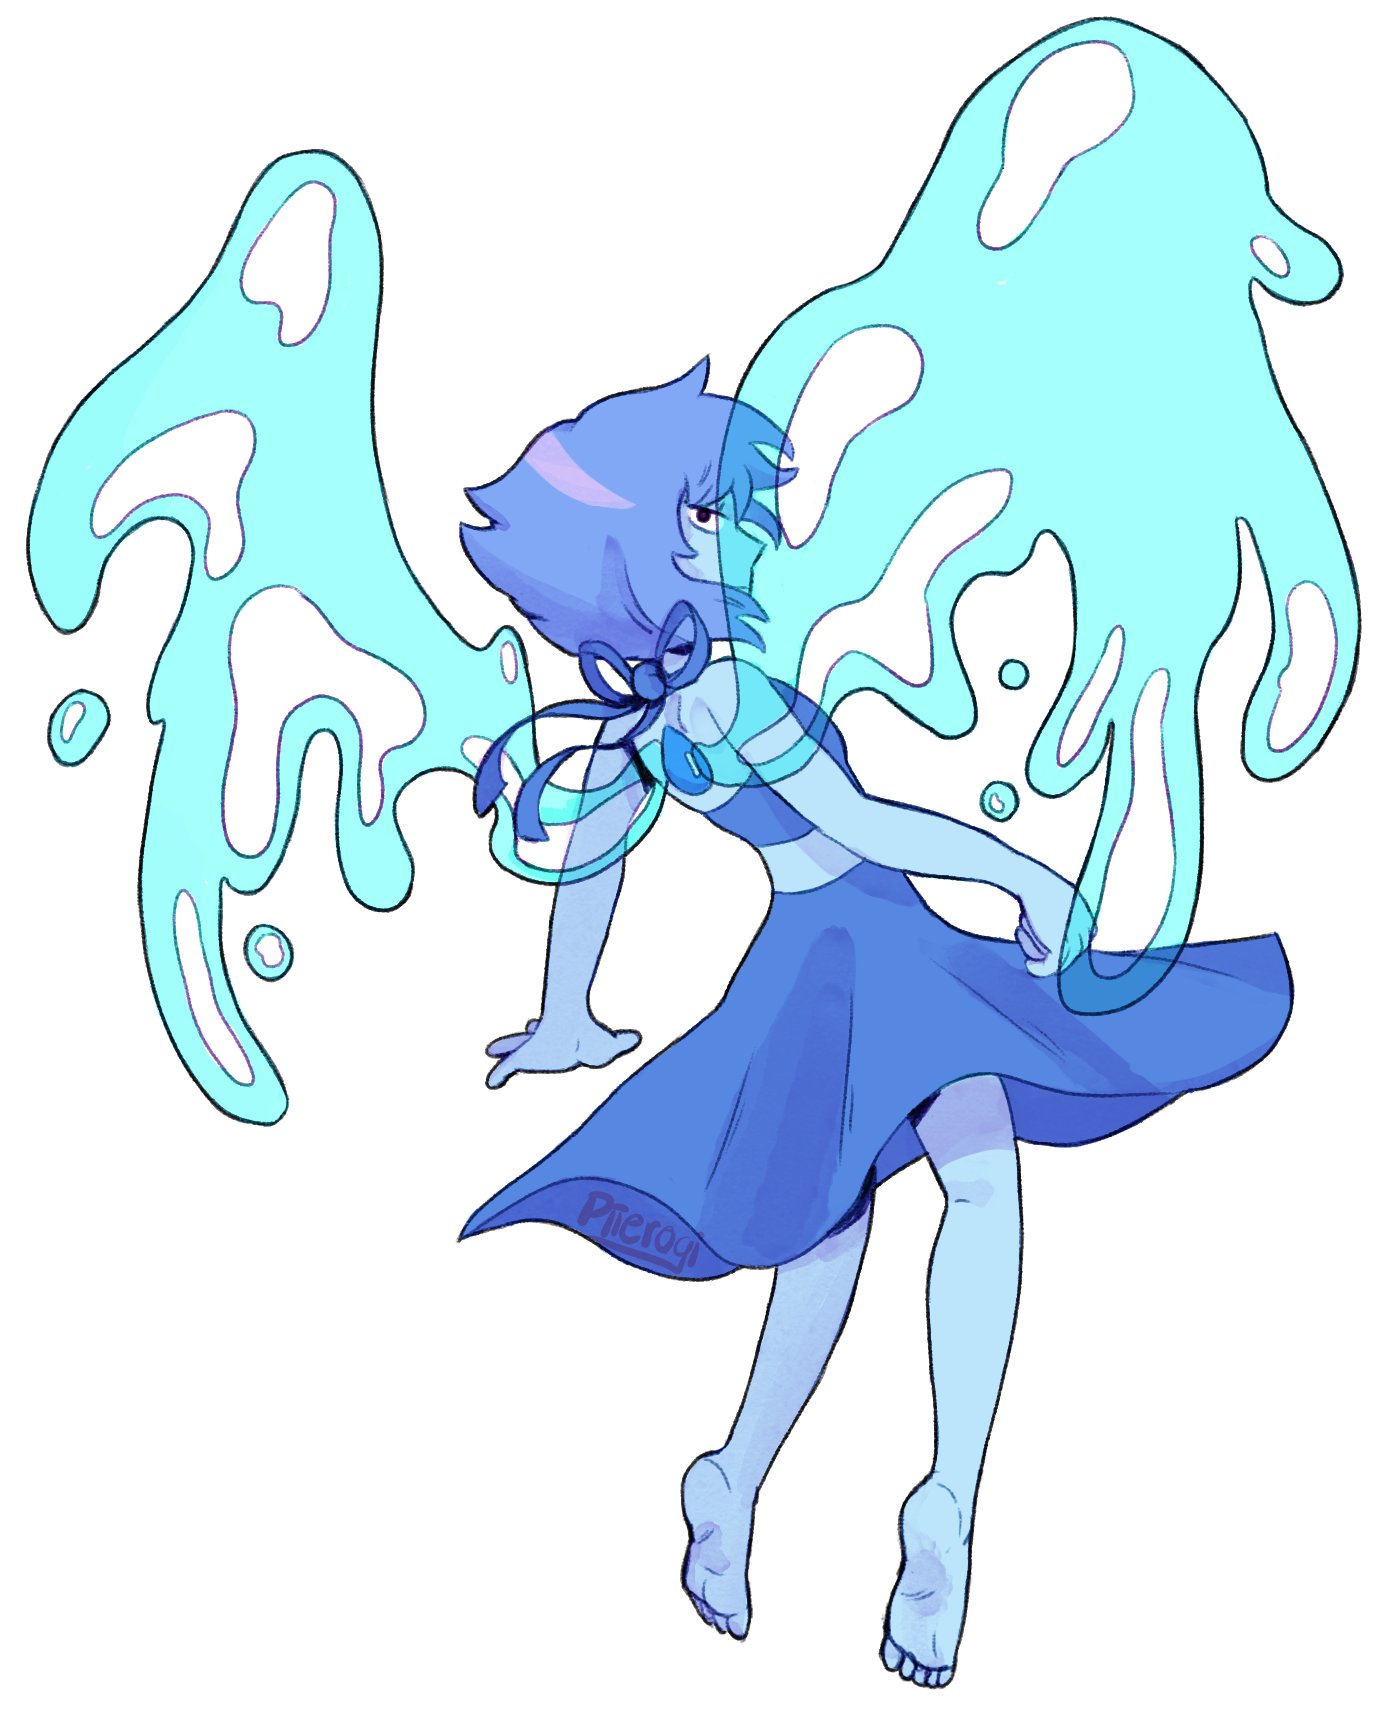 “Icarus who flew to close to the Sun with wings mad out of wax
#stevenuniverse #lapislazuli”